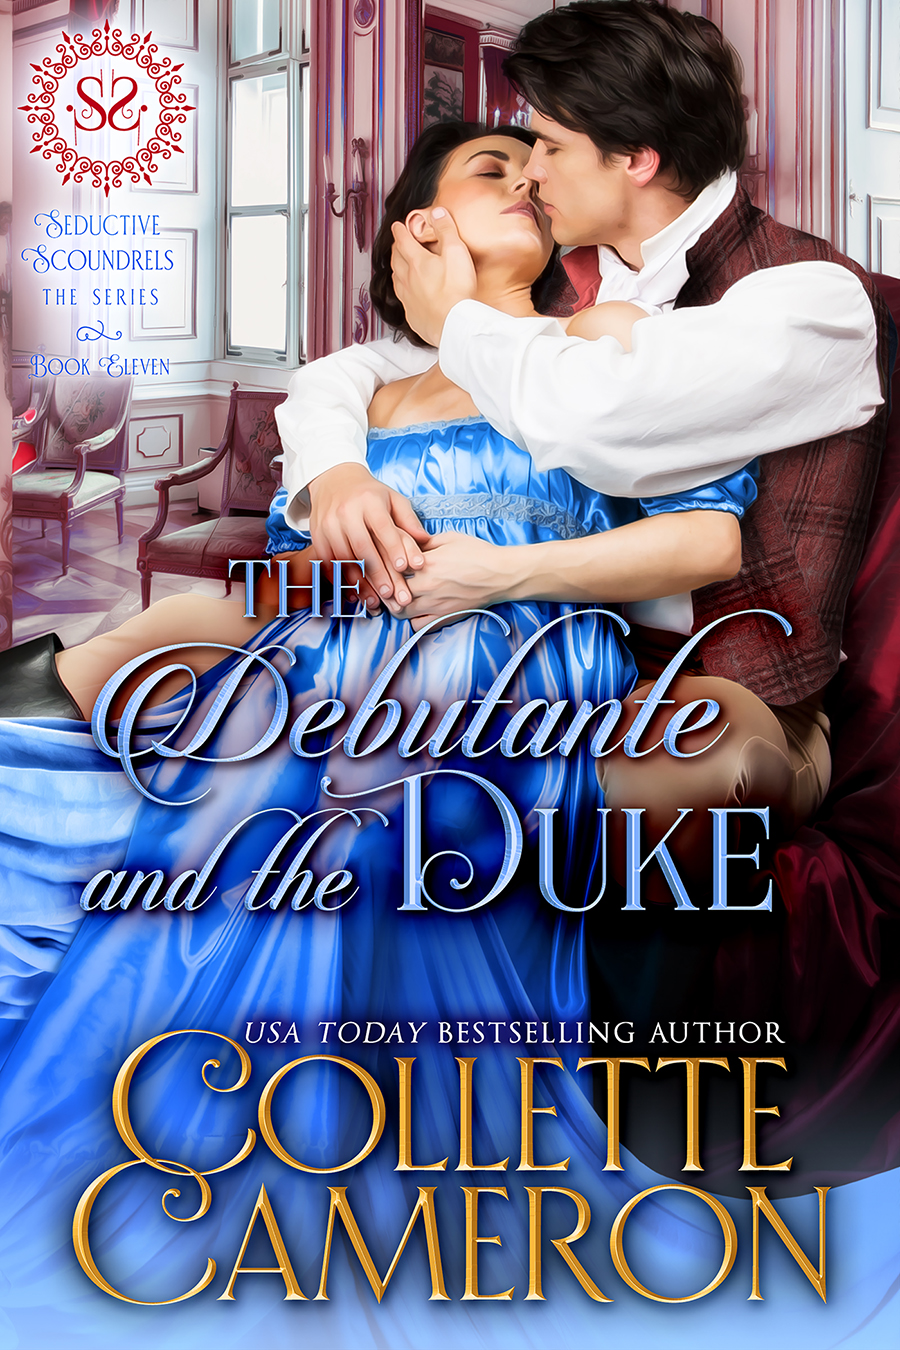 THE DEBUTANTE AND THE DUKE is here!